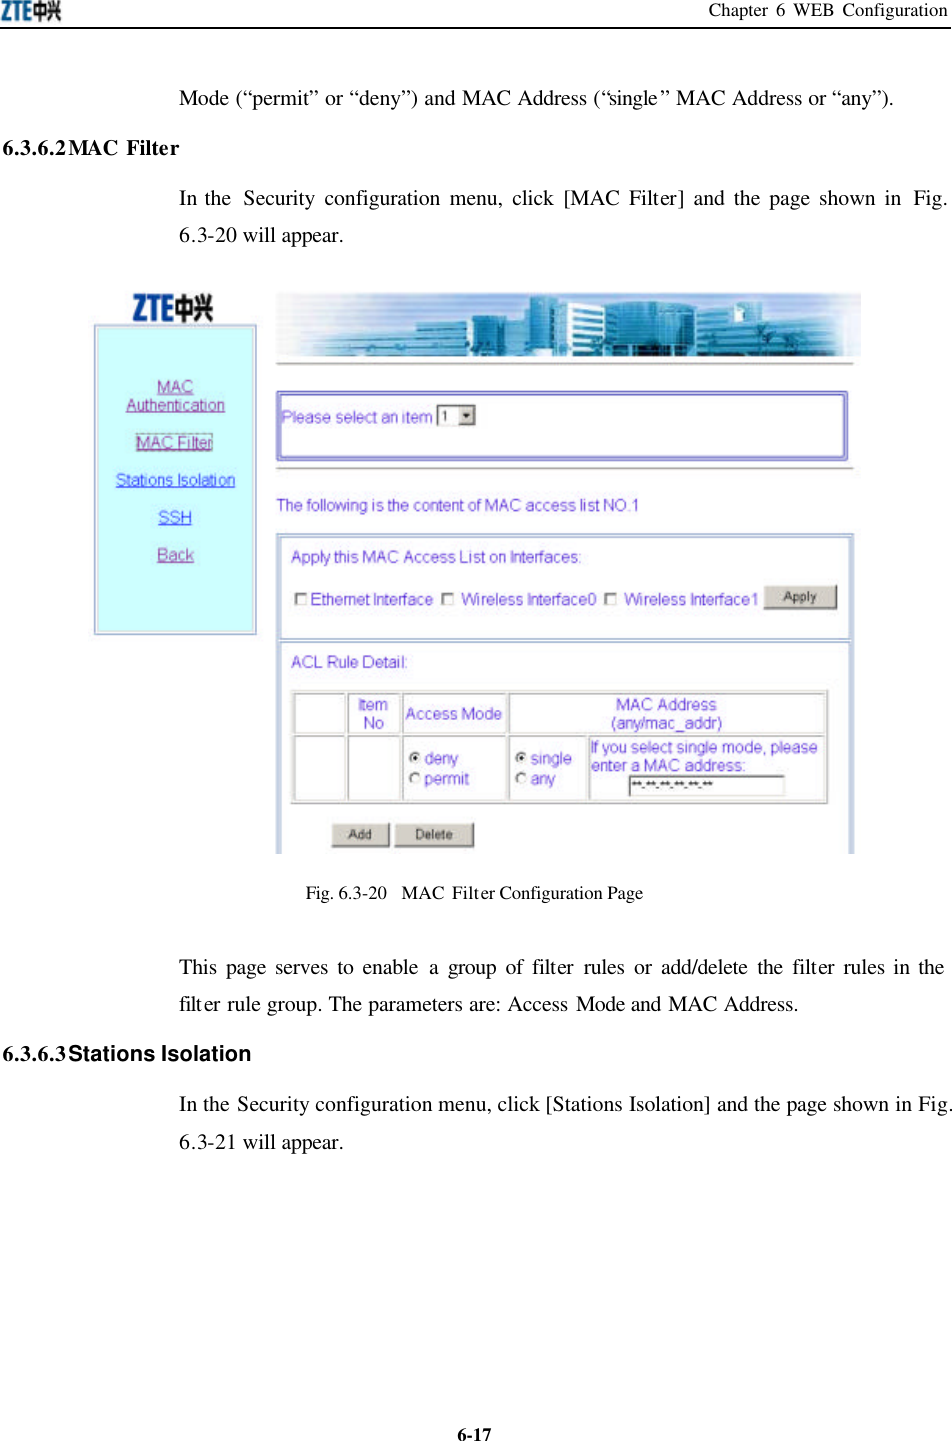 Chapter 6 WEB Configuration  6-17Mode (“permit” or “deny”) and MAC Address (“single” MAC Address or “any”).   6.3.6.2 MAC Filter In the  Security configuration menu, click [MAC Filter] and the page shown in Fig. 6.3-20 will appear.    Fig. 6.3-20  MAC Filter Configuration Page   This page serves to enable a group of filter rules or add/delete the filter rules in the filter rule group. The parameters are: Access Mode and MAC Address.   6.3.6.3 Stations Isolation   In the Security configuration menu, click [Stations Isolation] and the page shown in Fig. 6.3-21 will appear.   